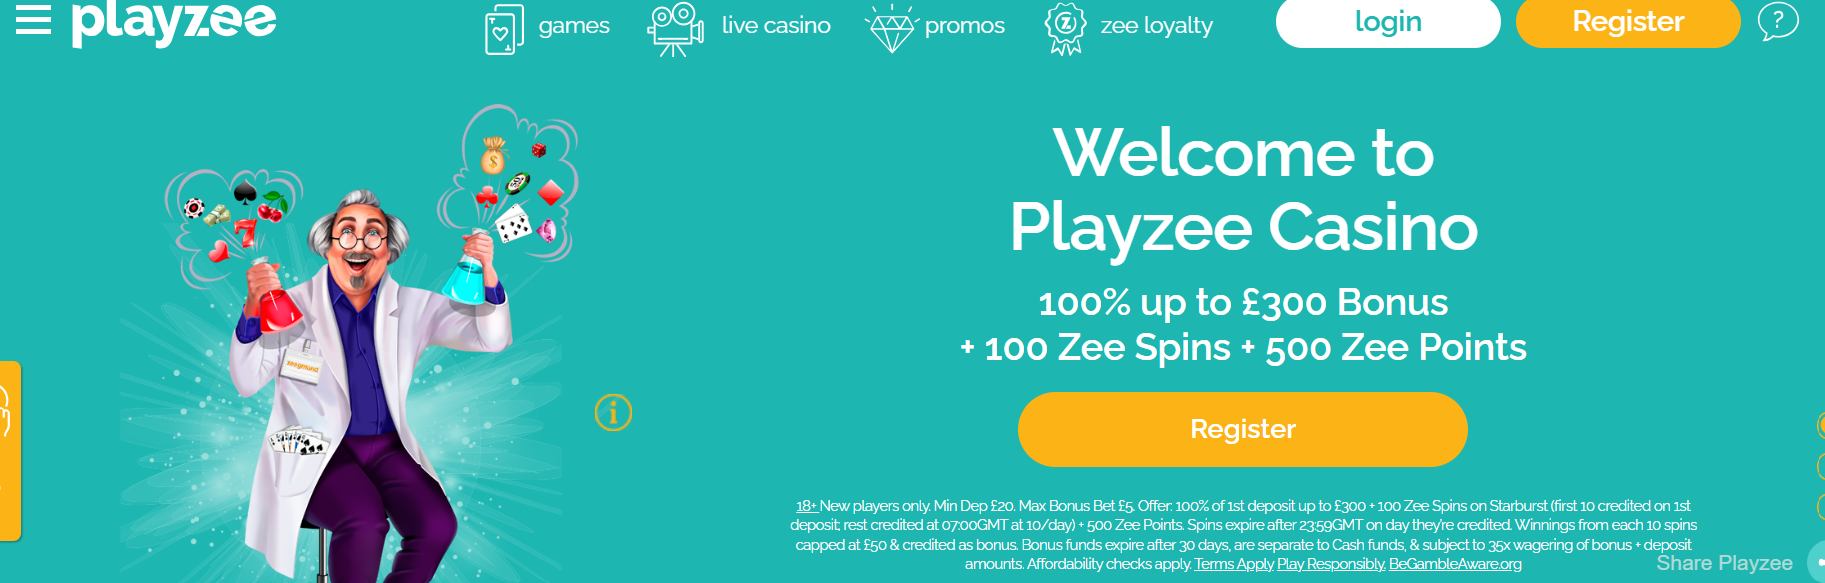 Playzee Welcome Offer